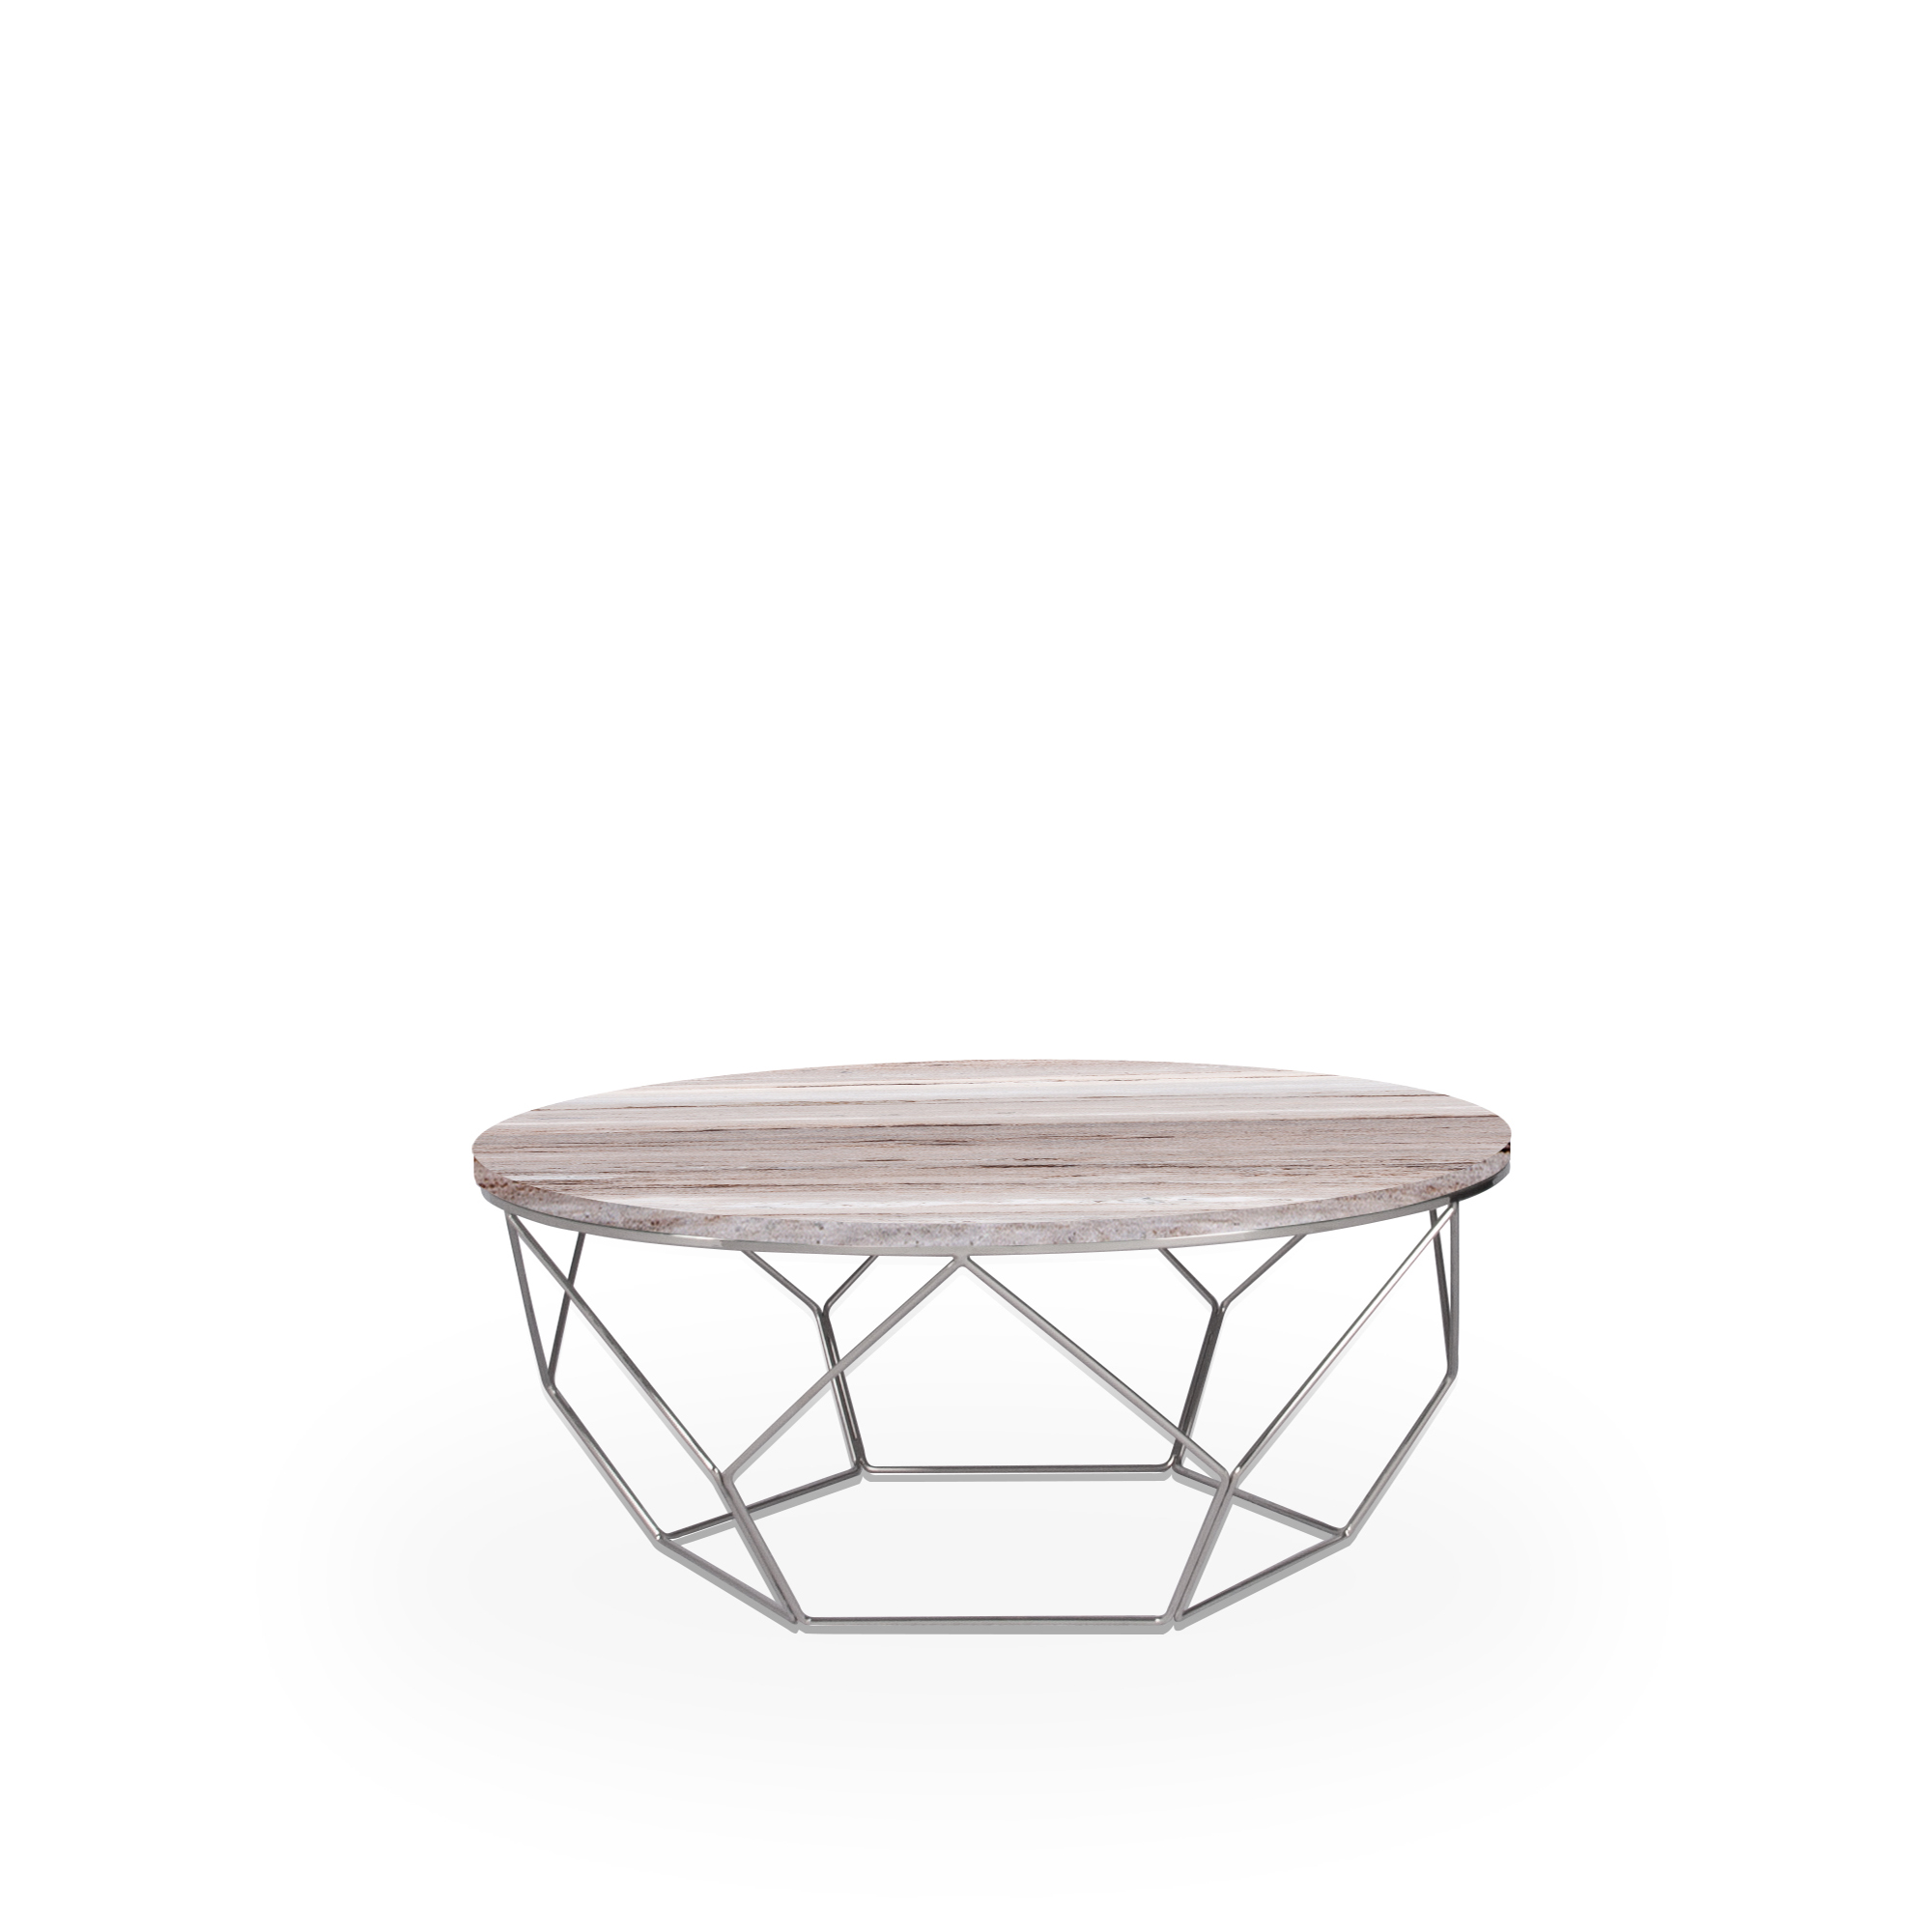 Semper C | Art Series | Decasa Marble Marble Dining Table